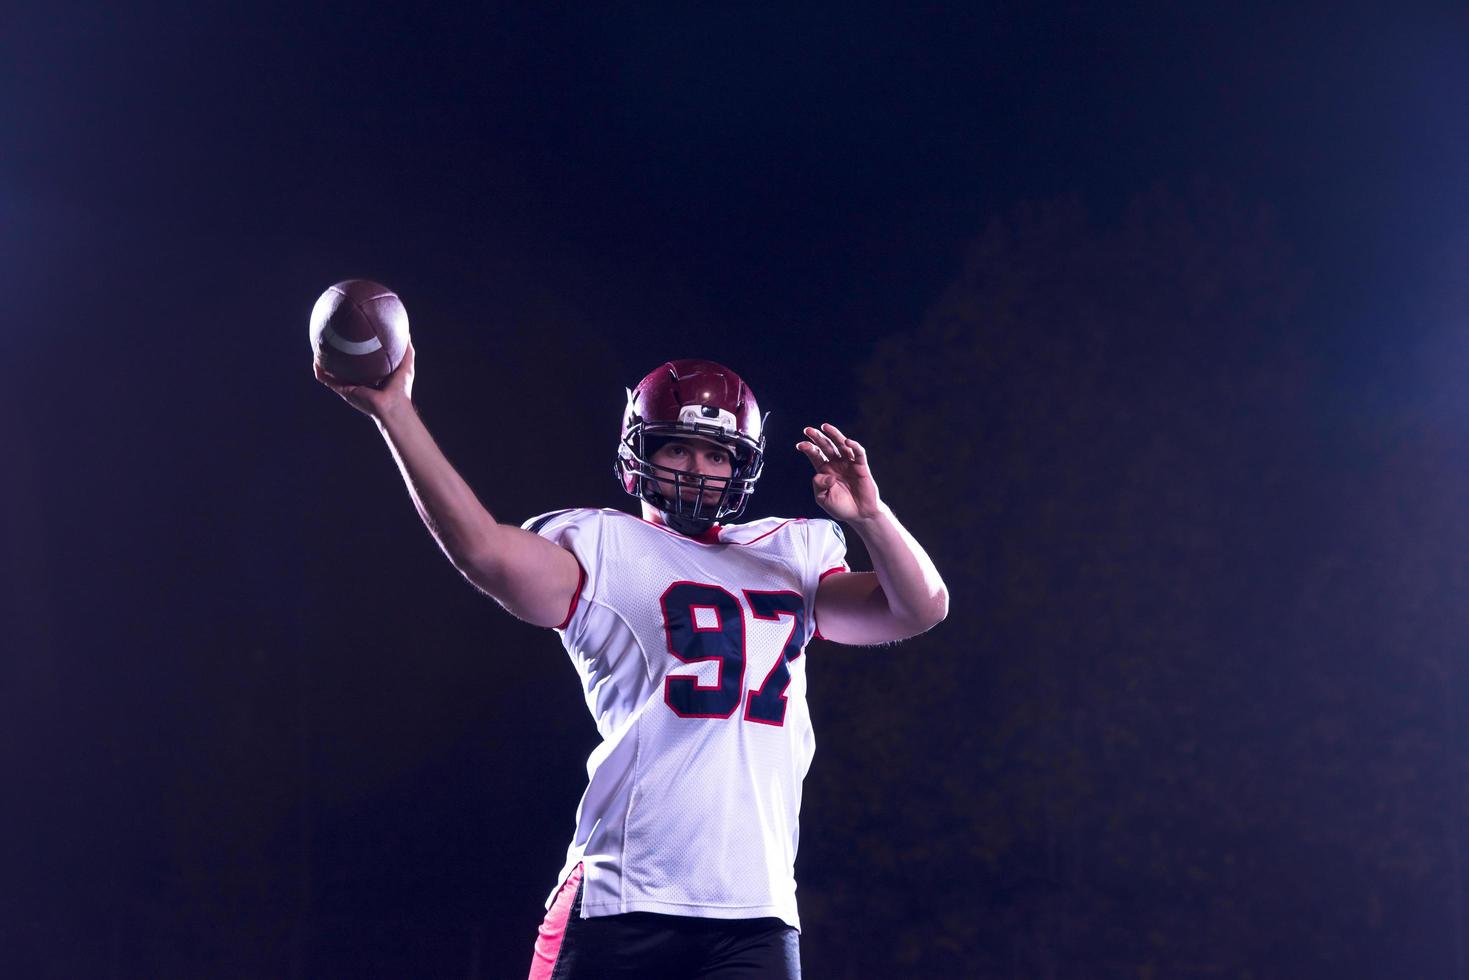 american football player throwing rugby ball photo